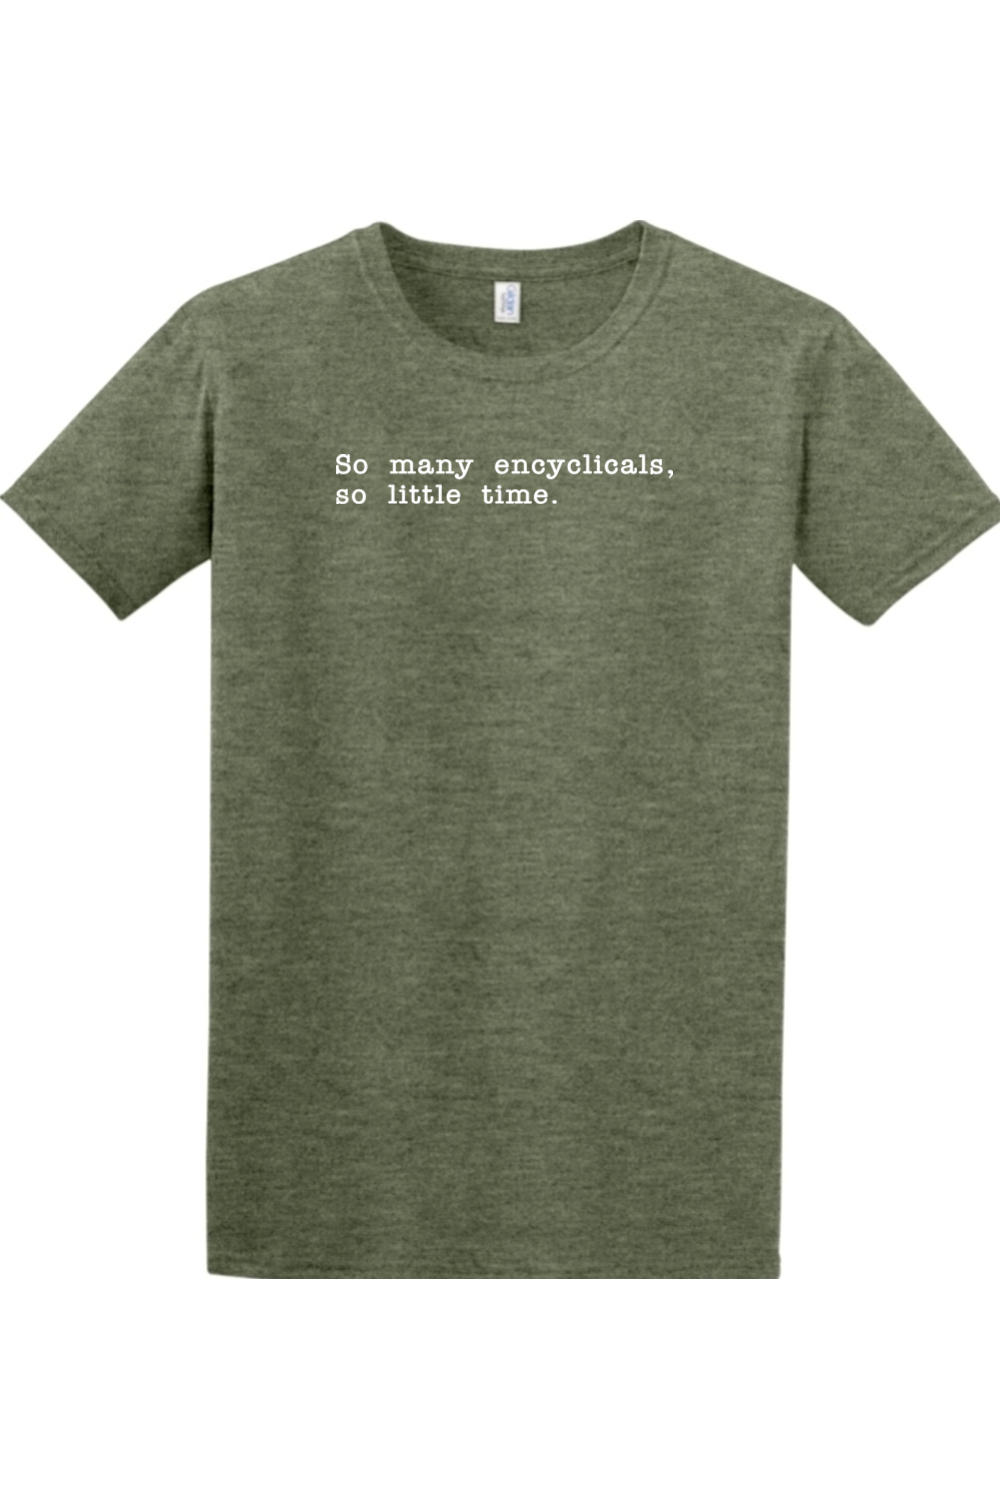 So Many Encyclicals - Adult T-Shirt